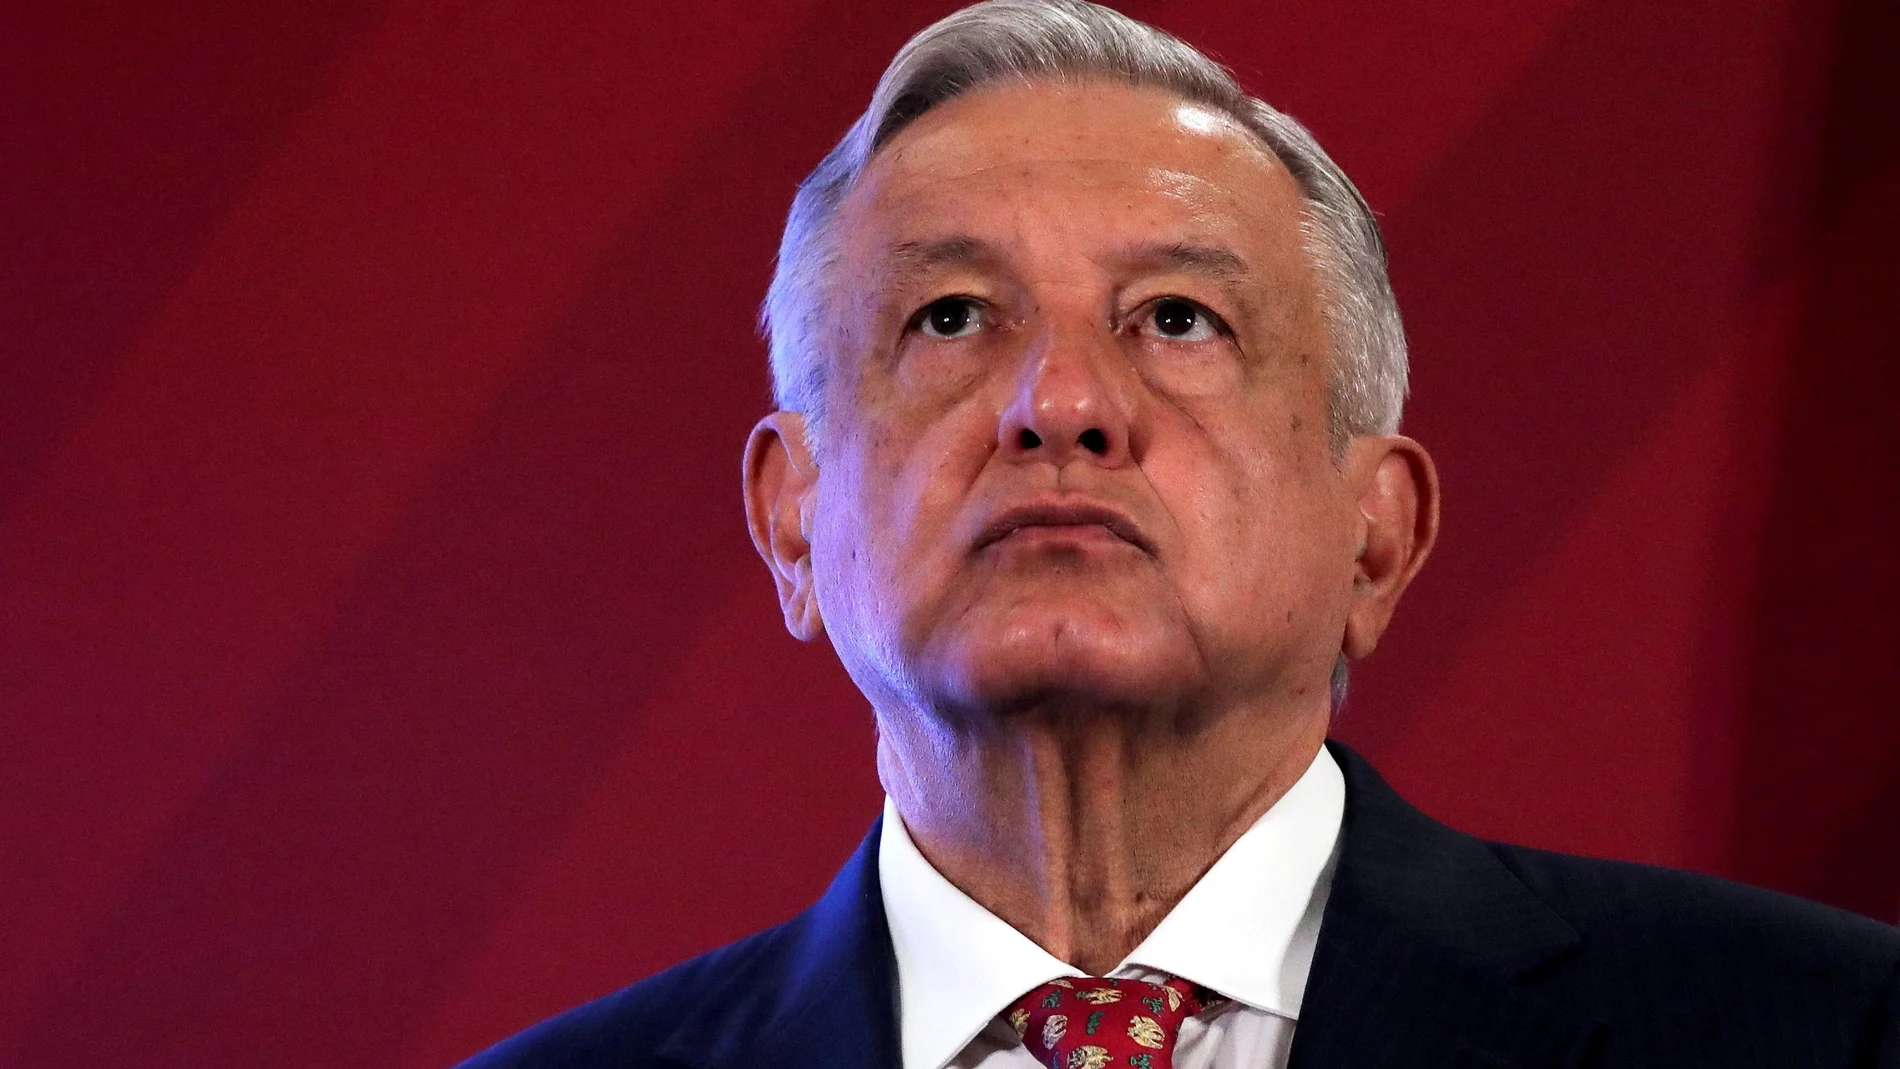 FILE PHOTO: Mexico's President Andres Manuel Lopez Obrador looks up during a news conference at the National Palace in Mexico City, Mexico June 30, 2020. Picture taken June 30, 2020. REUTERS/Henry Romero/File Photo